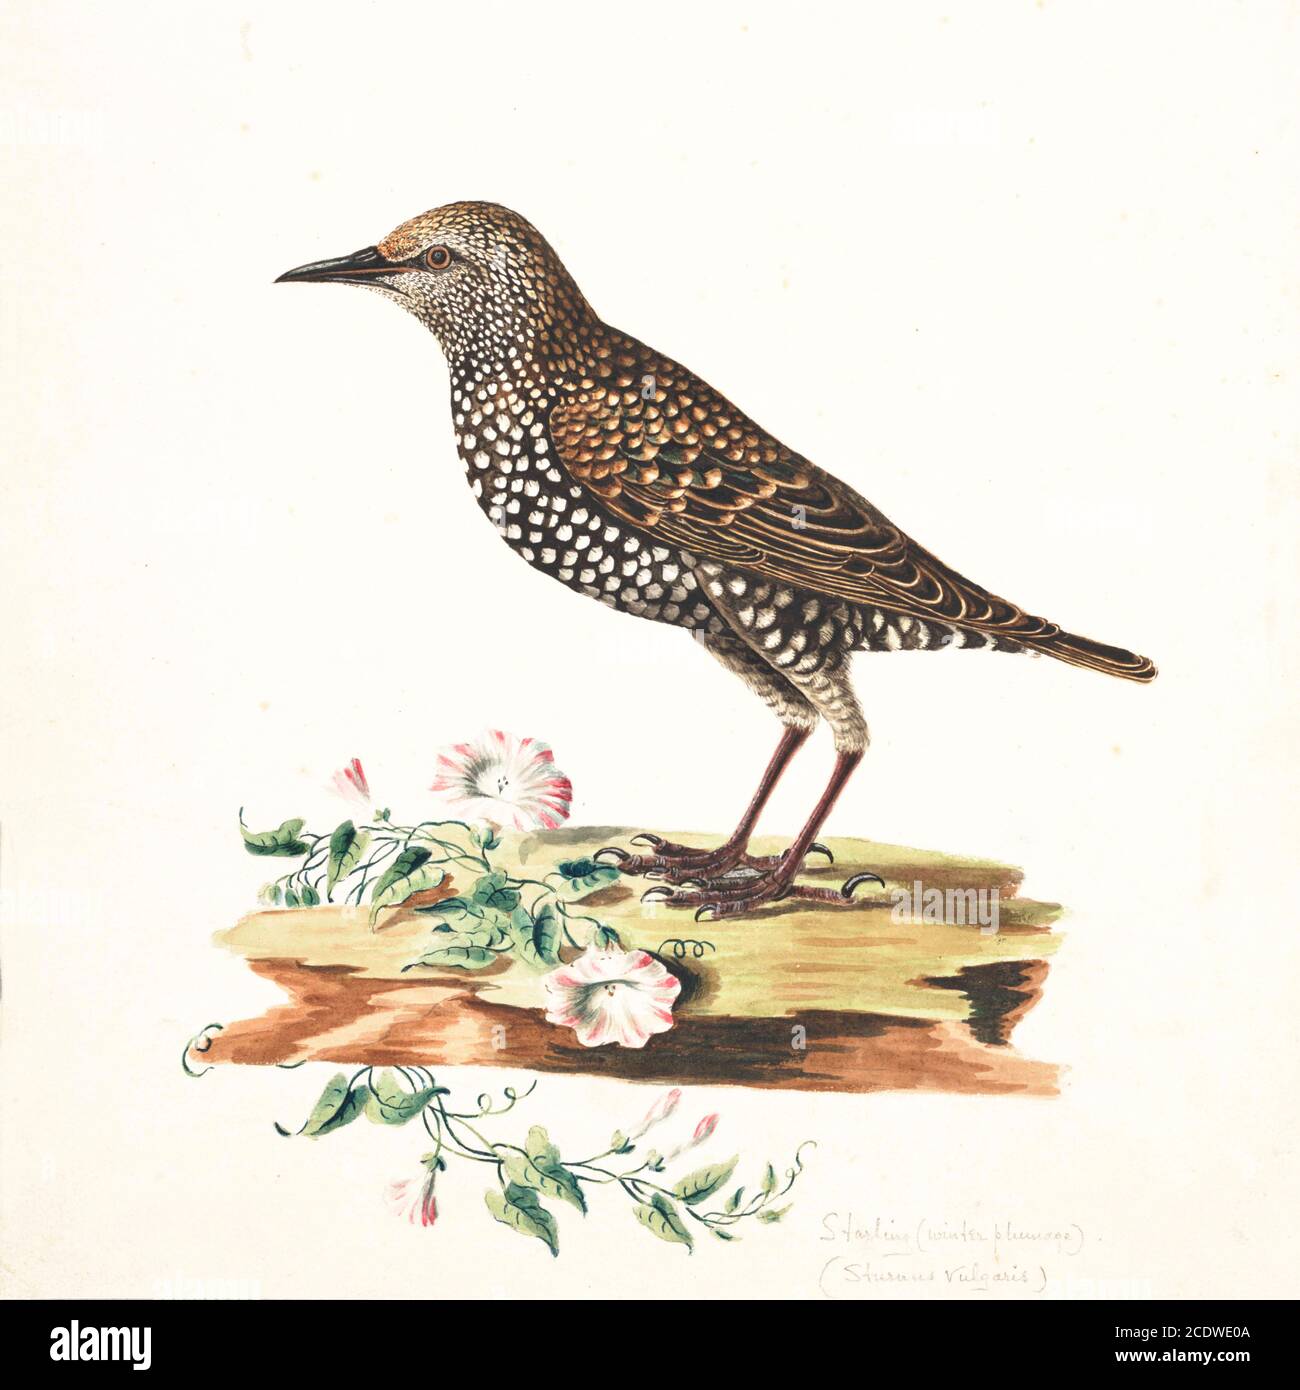 The common starling (Sturnus vulgaris), also known as the European starling or simply the starling, is a medium-sized passerine bird in the starling family, Sturnidae. 18th century watercolor painting by Elizabeth Gwillim. Lady Elizabeth Symonds Gwillim (21 April 1763 – 21 December 1807) was an artist married to Sir Henry Gwillim, Puisne Judge at the Madras high court until 1808. Lady Gwillim painted a series of about 200 watercolours of Indian birds. Produced about 20 years before John James Audubon, her work has been acclaimed for its accuracy and natural postures as they were drawn from obs Stock Photo